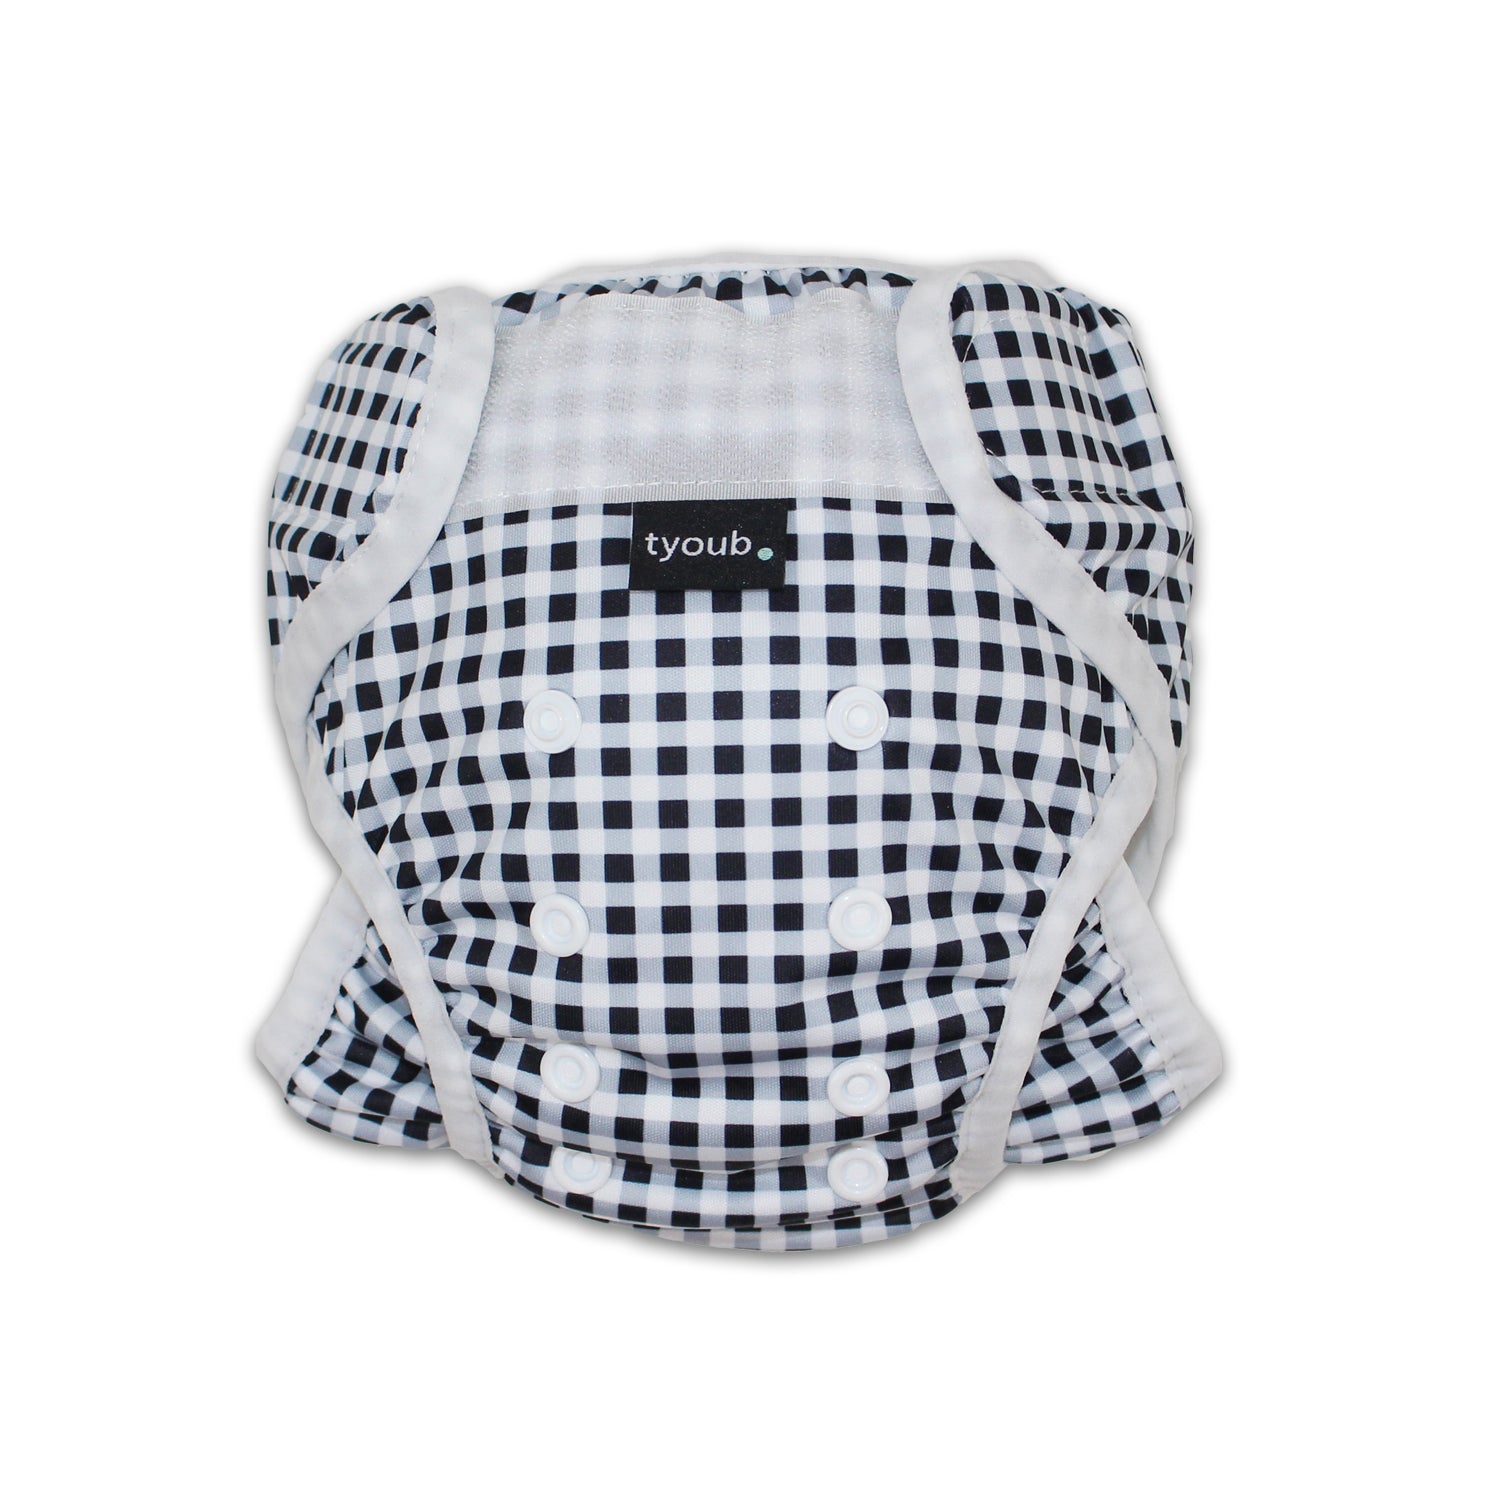 The Reusable Swim Nappy and Wet Bag in the colour black and white Gingham Check is Excellent for swimming lessons and all aquatic play. This swim nappy fits all babies from 3 months to 3 years old. With double inner leg gusset, it is leak and accident proof. Has a Snug fit and soft elastic seams. With no gaps, the exact waistband fit with soft VELCRO tabs. Made in quick dry fabric.